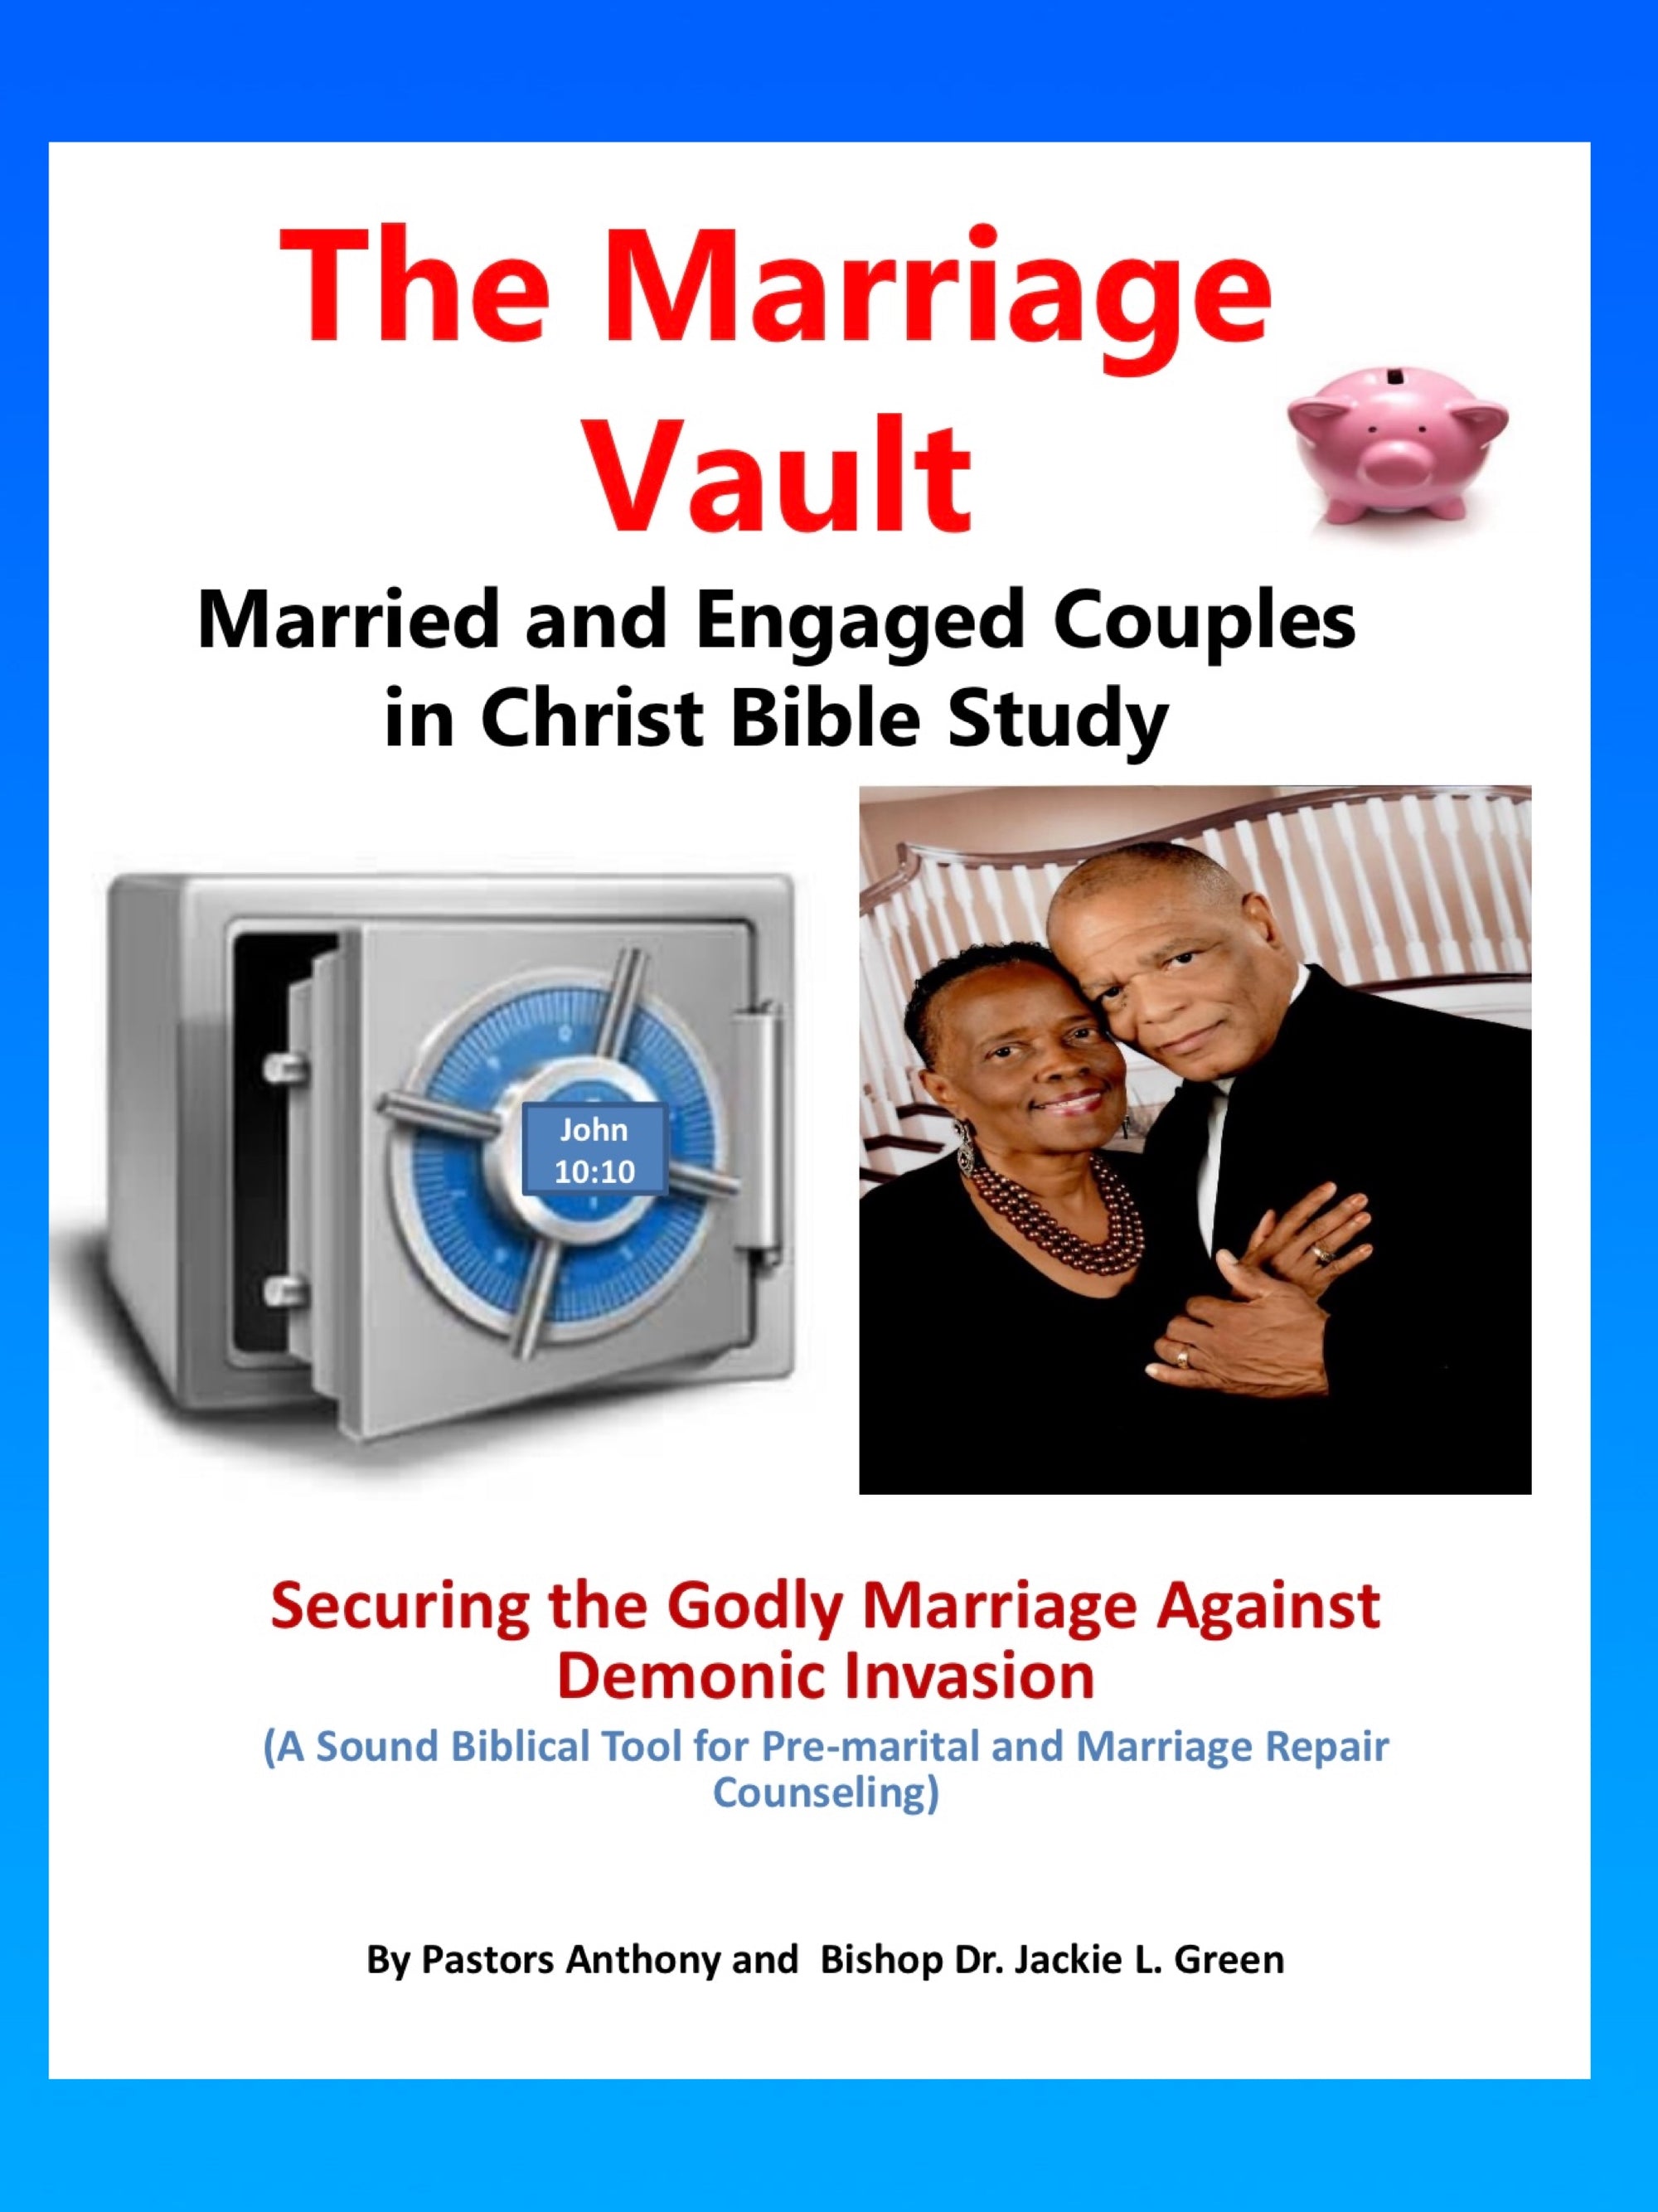 The Marriage Vault